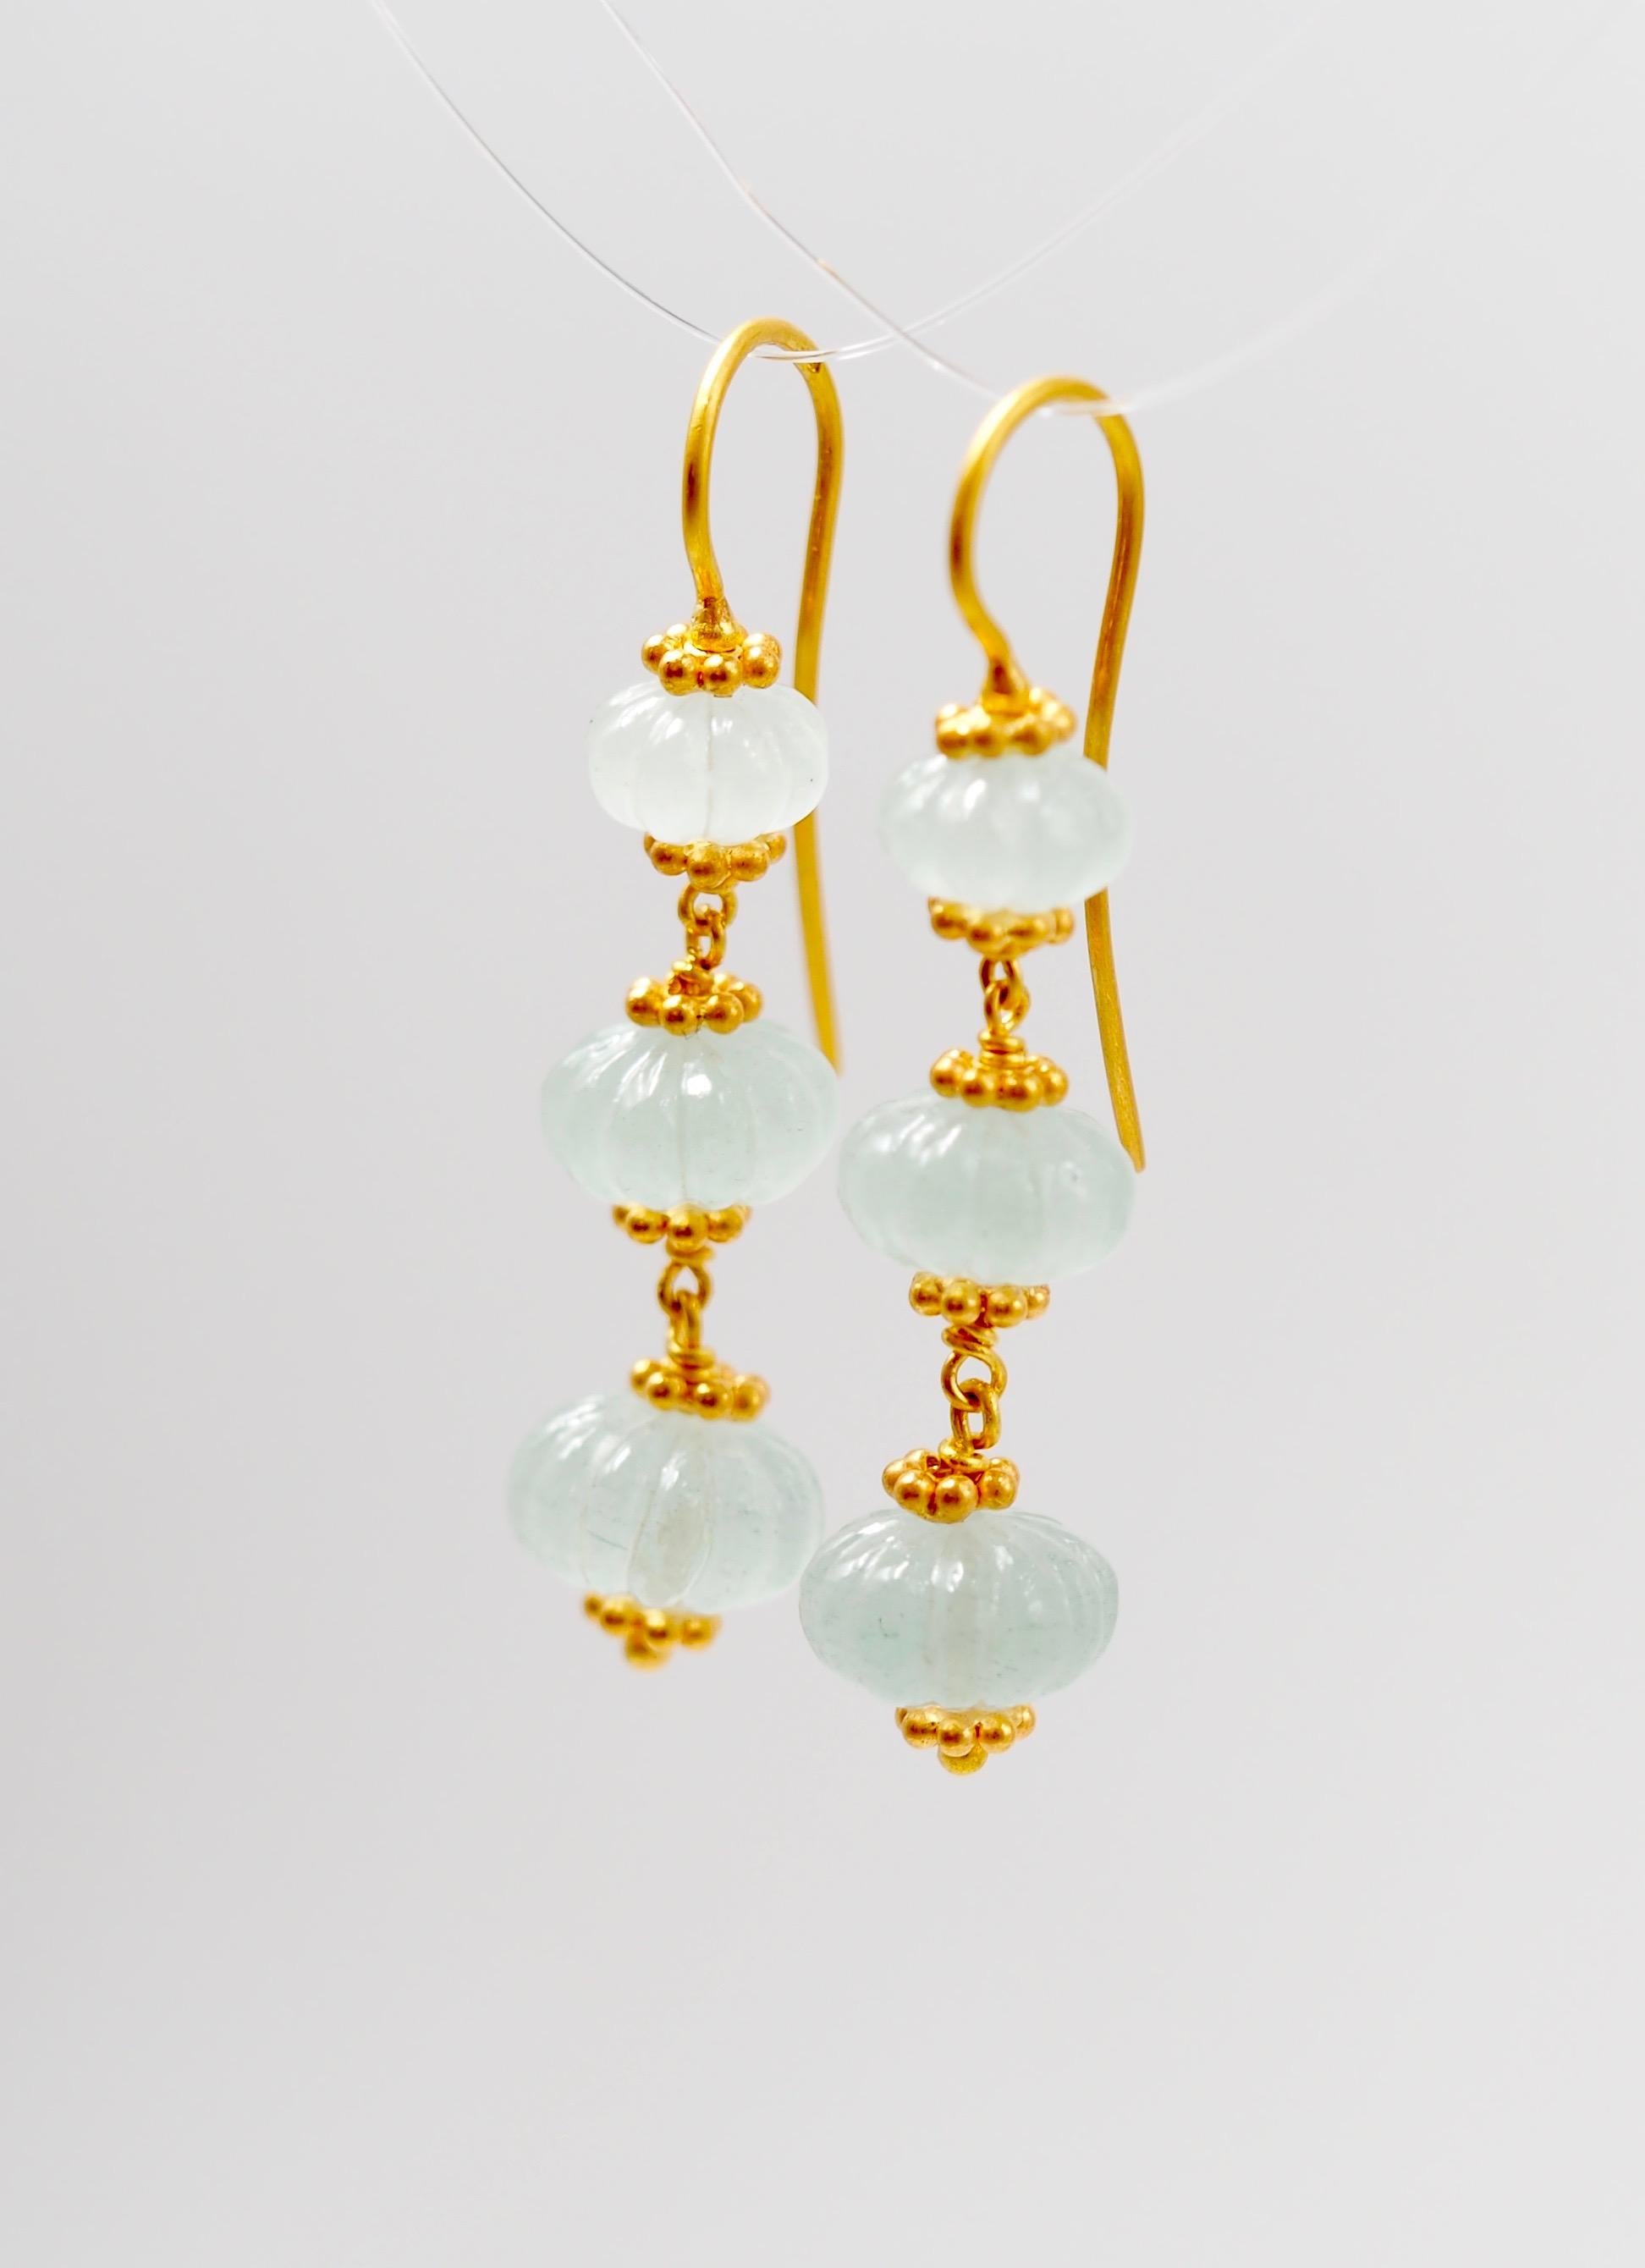 These earrings by Scrives are made of 6 watermelon shape beads of translucent greenish aquamarine for a total weight of 17.38 cts.
The watermelons show decreasing sizes. 
The same earrings exist also in lapis lazuli and in amethyst.

This